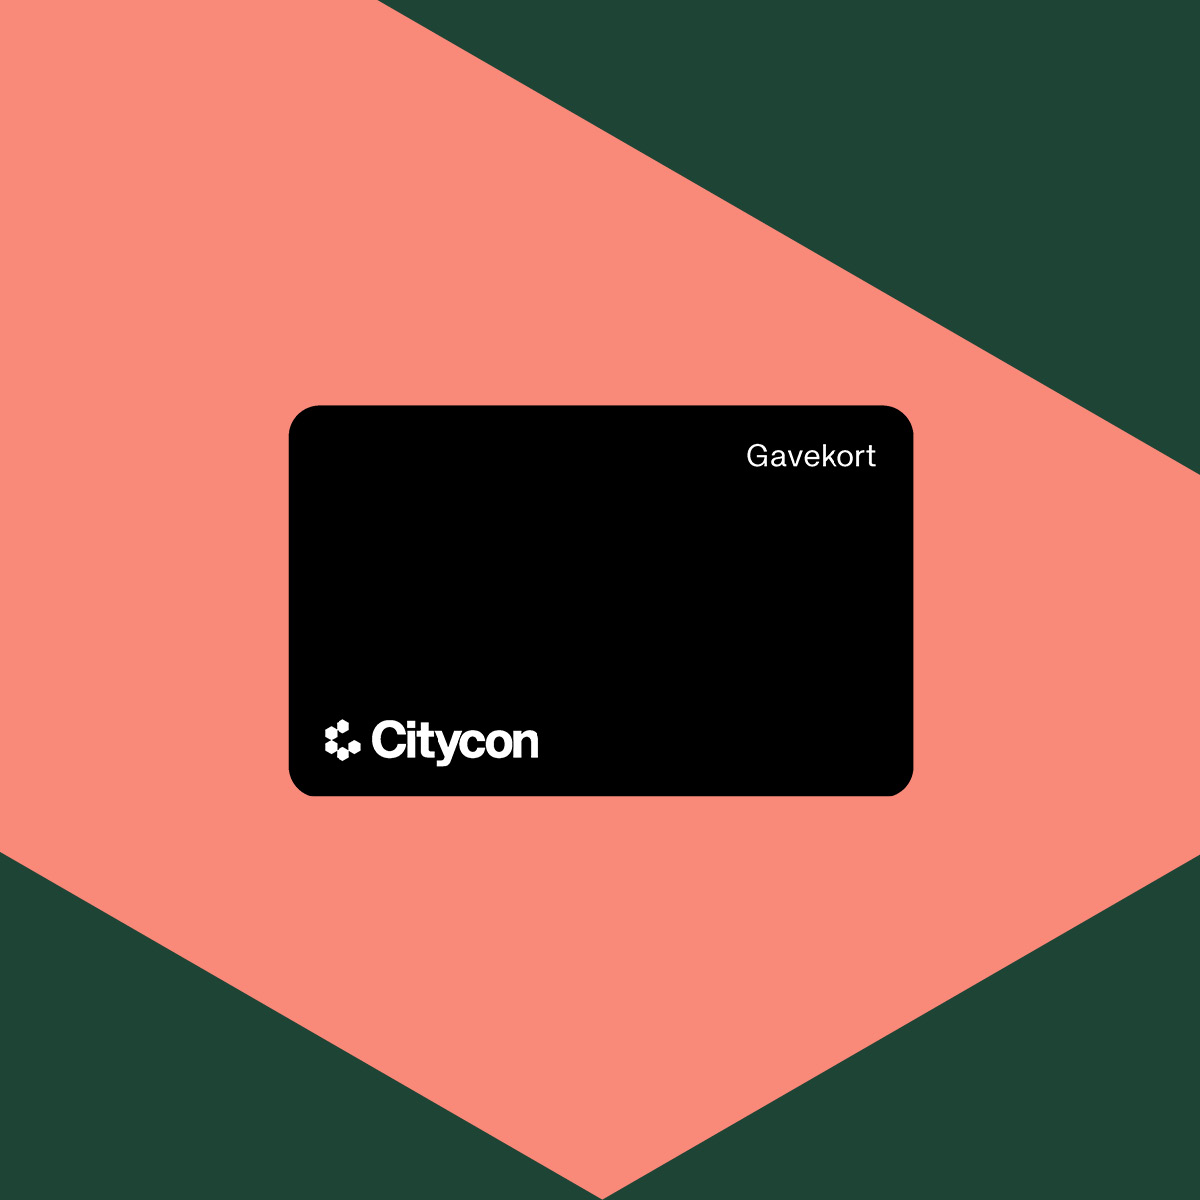 CINC_Webpage_Banners_Sub-page_giftcard_lift-section_NOR_CoralGreen